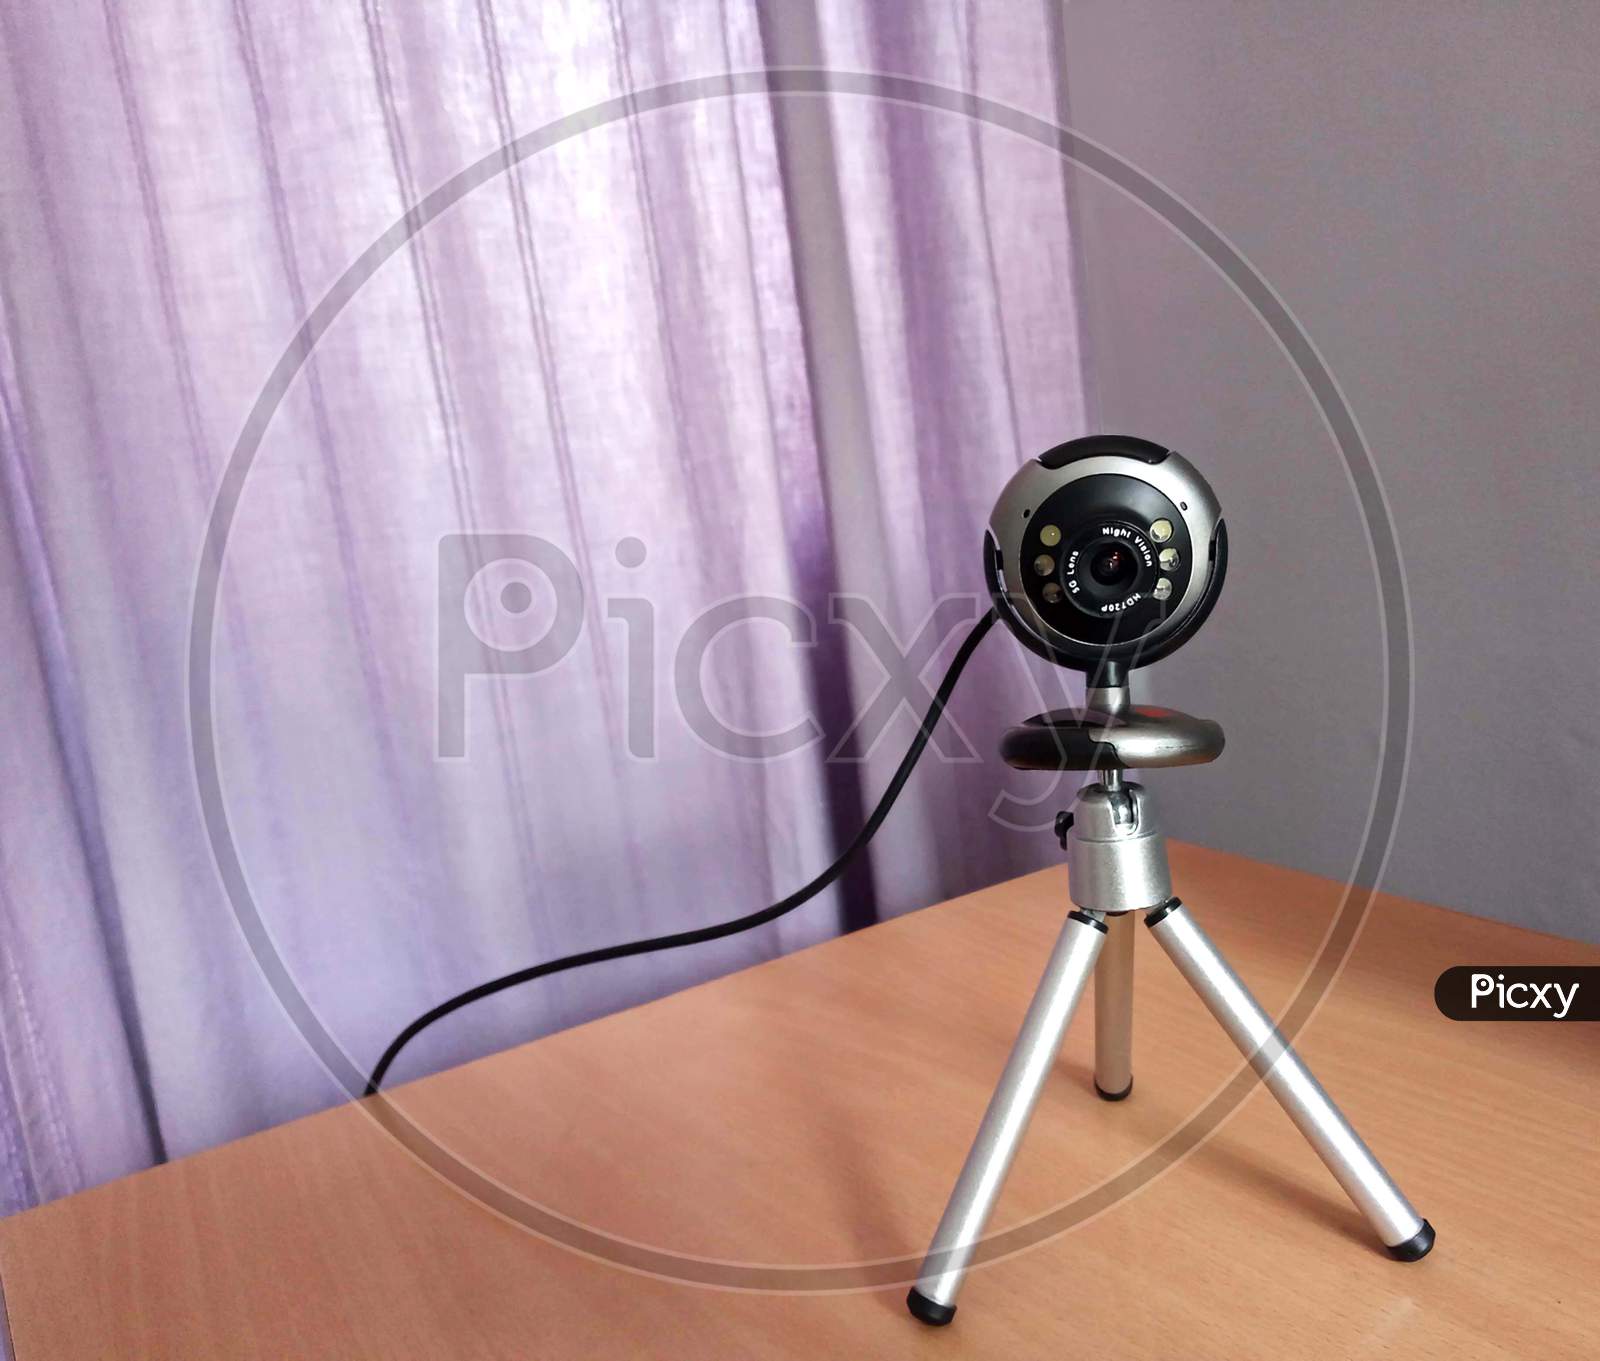 Webcam with stand in front of the computer